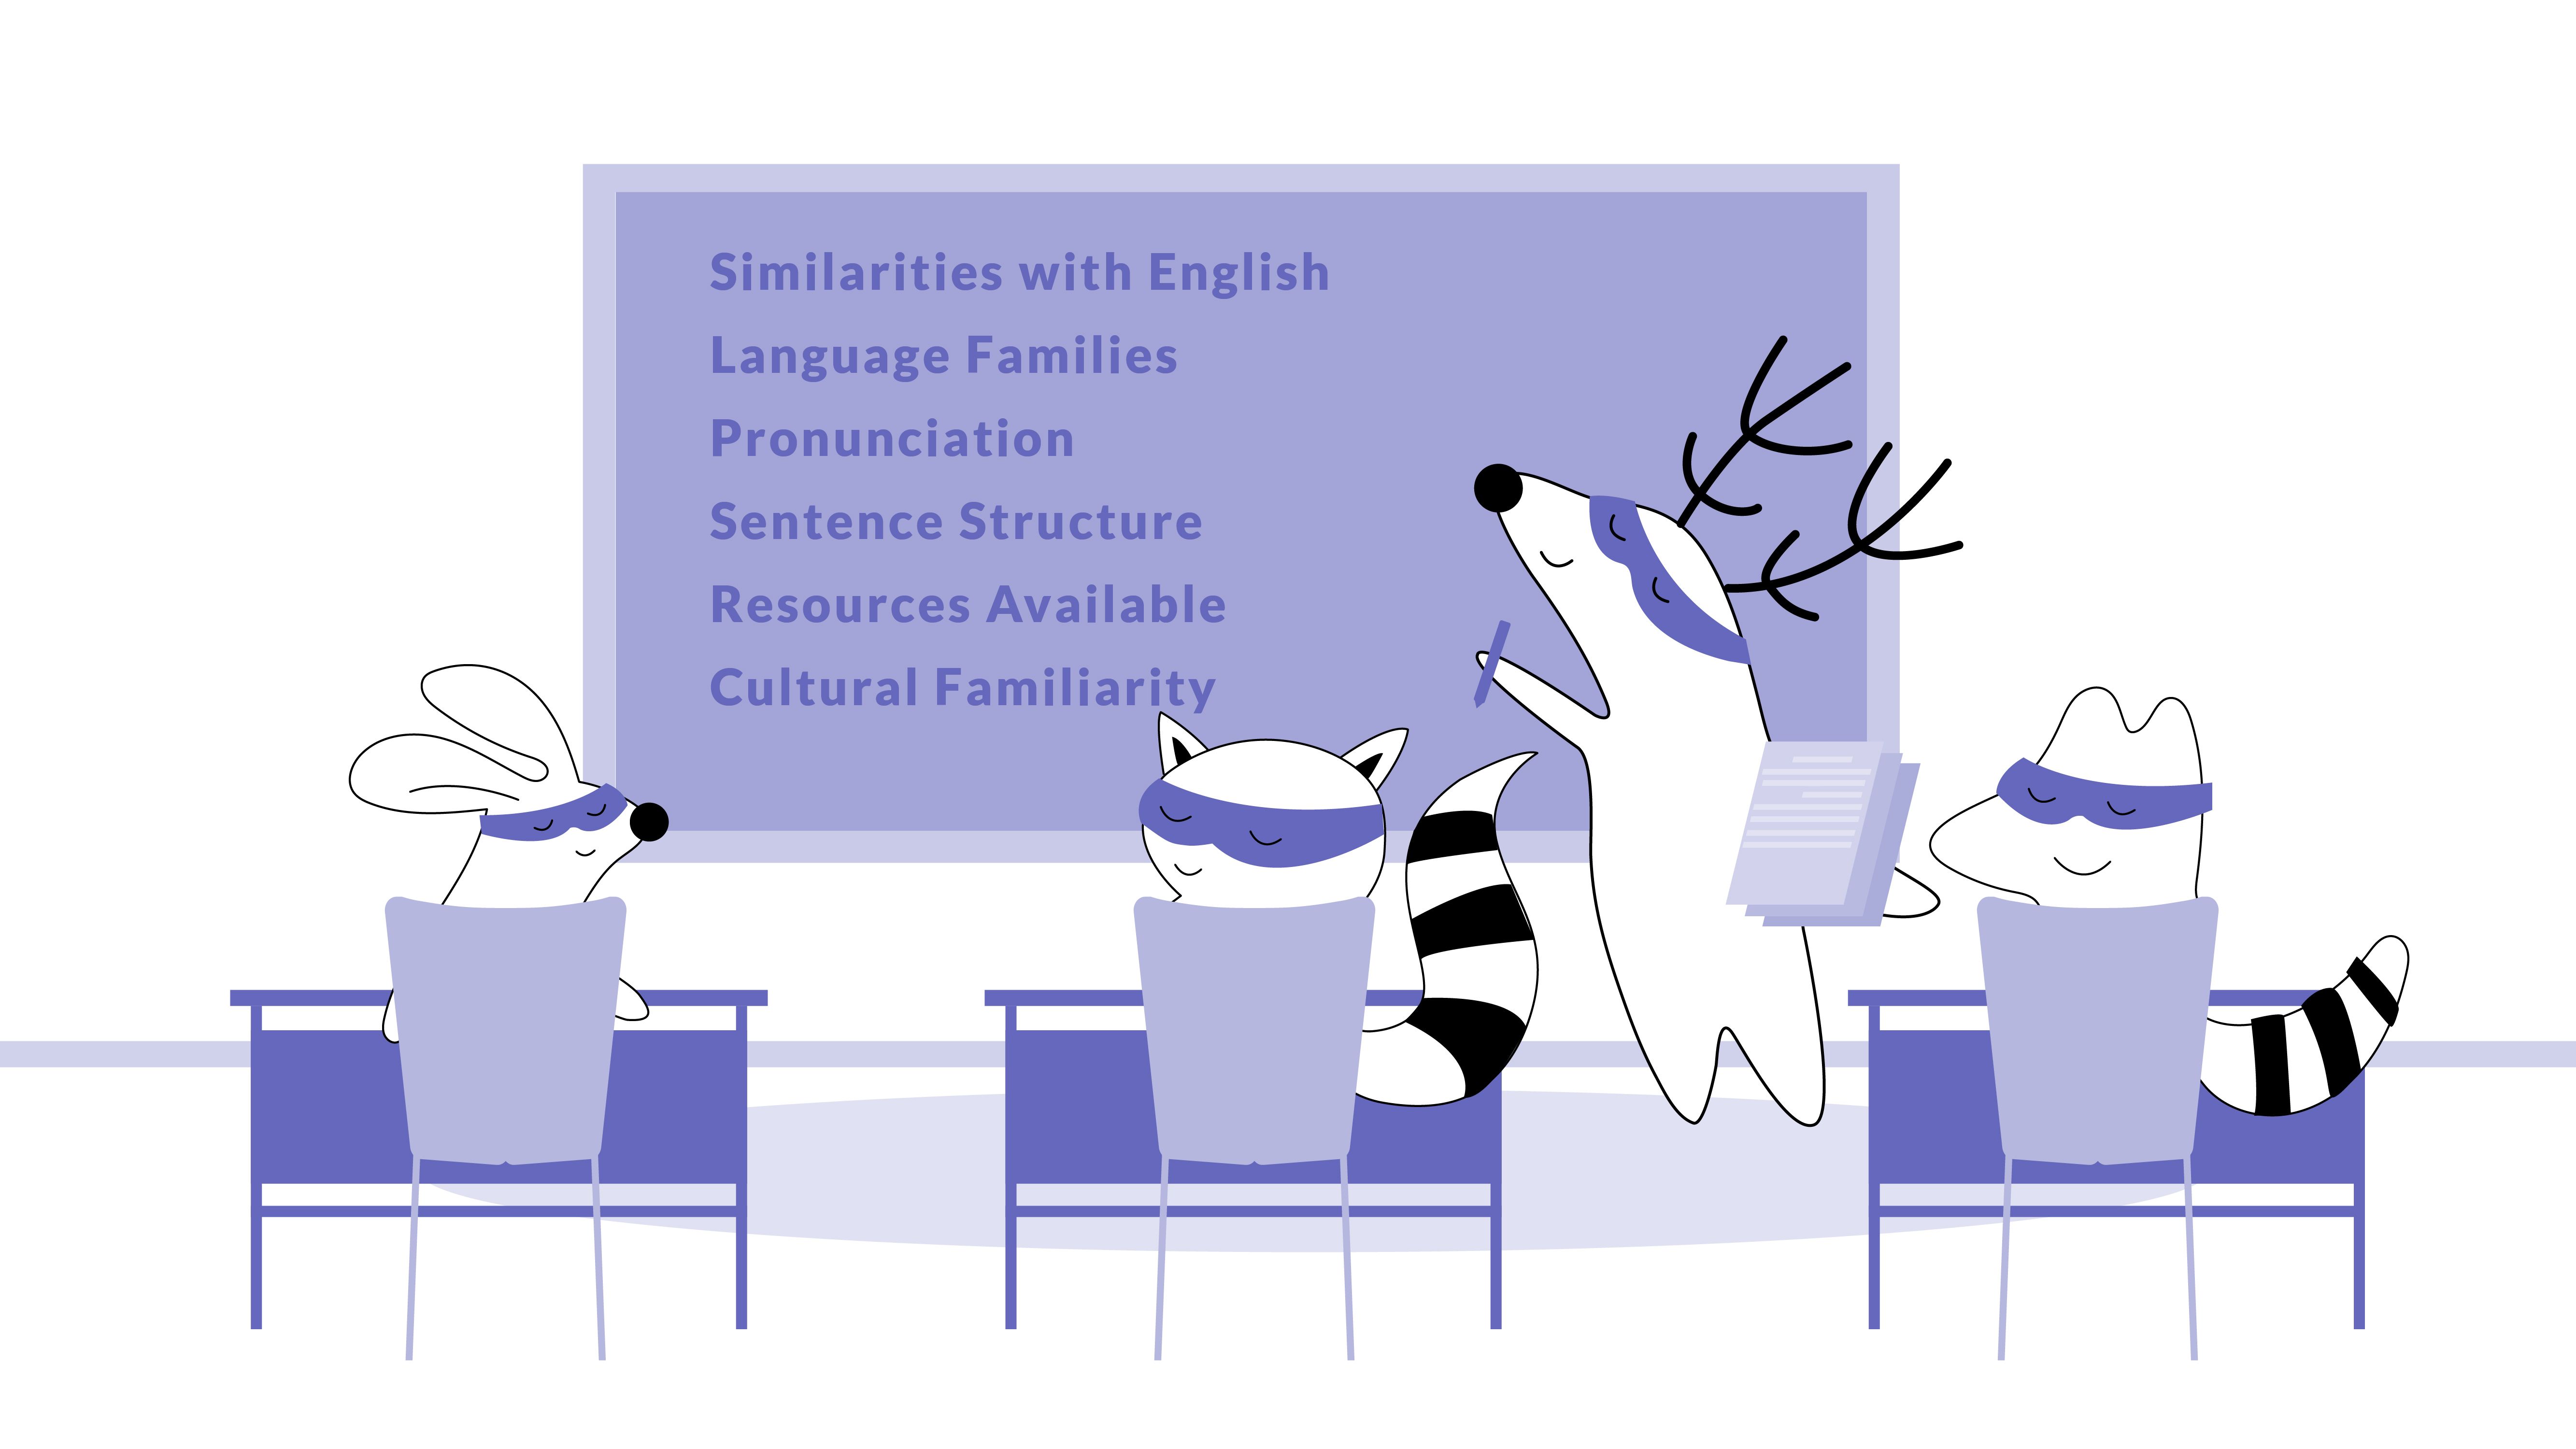 There are several key factors outlined on the blackboard: Similarities with English, Language Families, Pronunciation, Sentence Structure, Resources Available, and Cultural Familiarity.